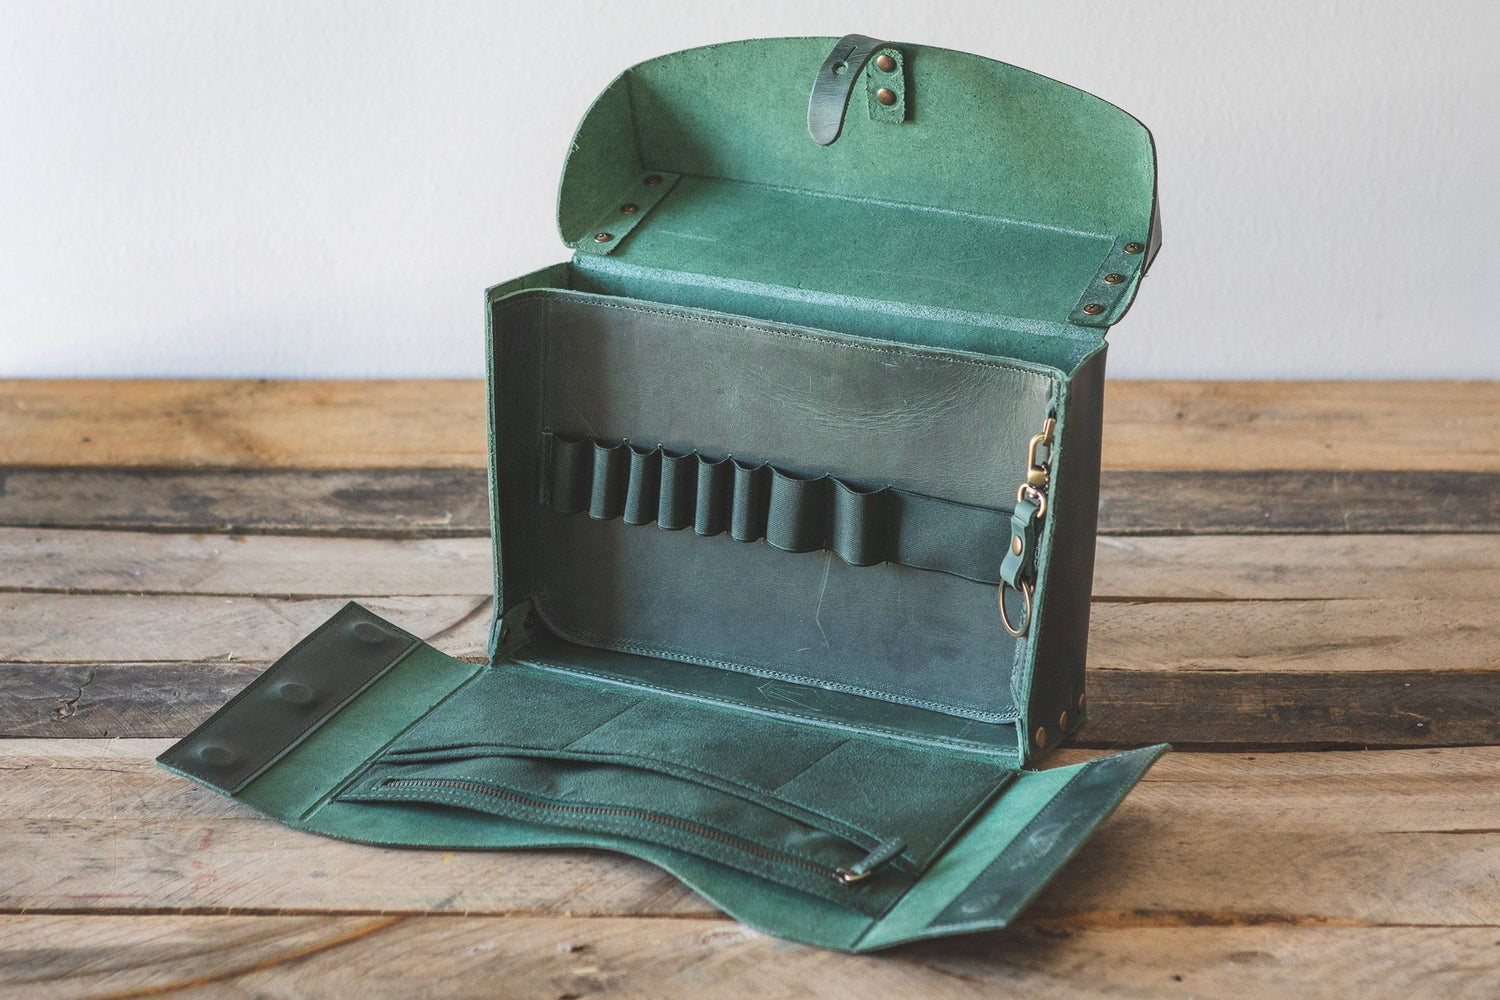 Handmade Green Leather Tote Bag - Galen Leather